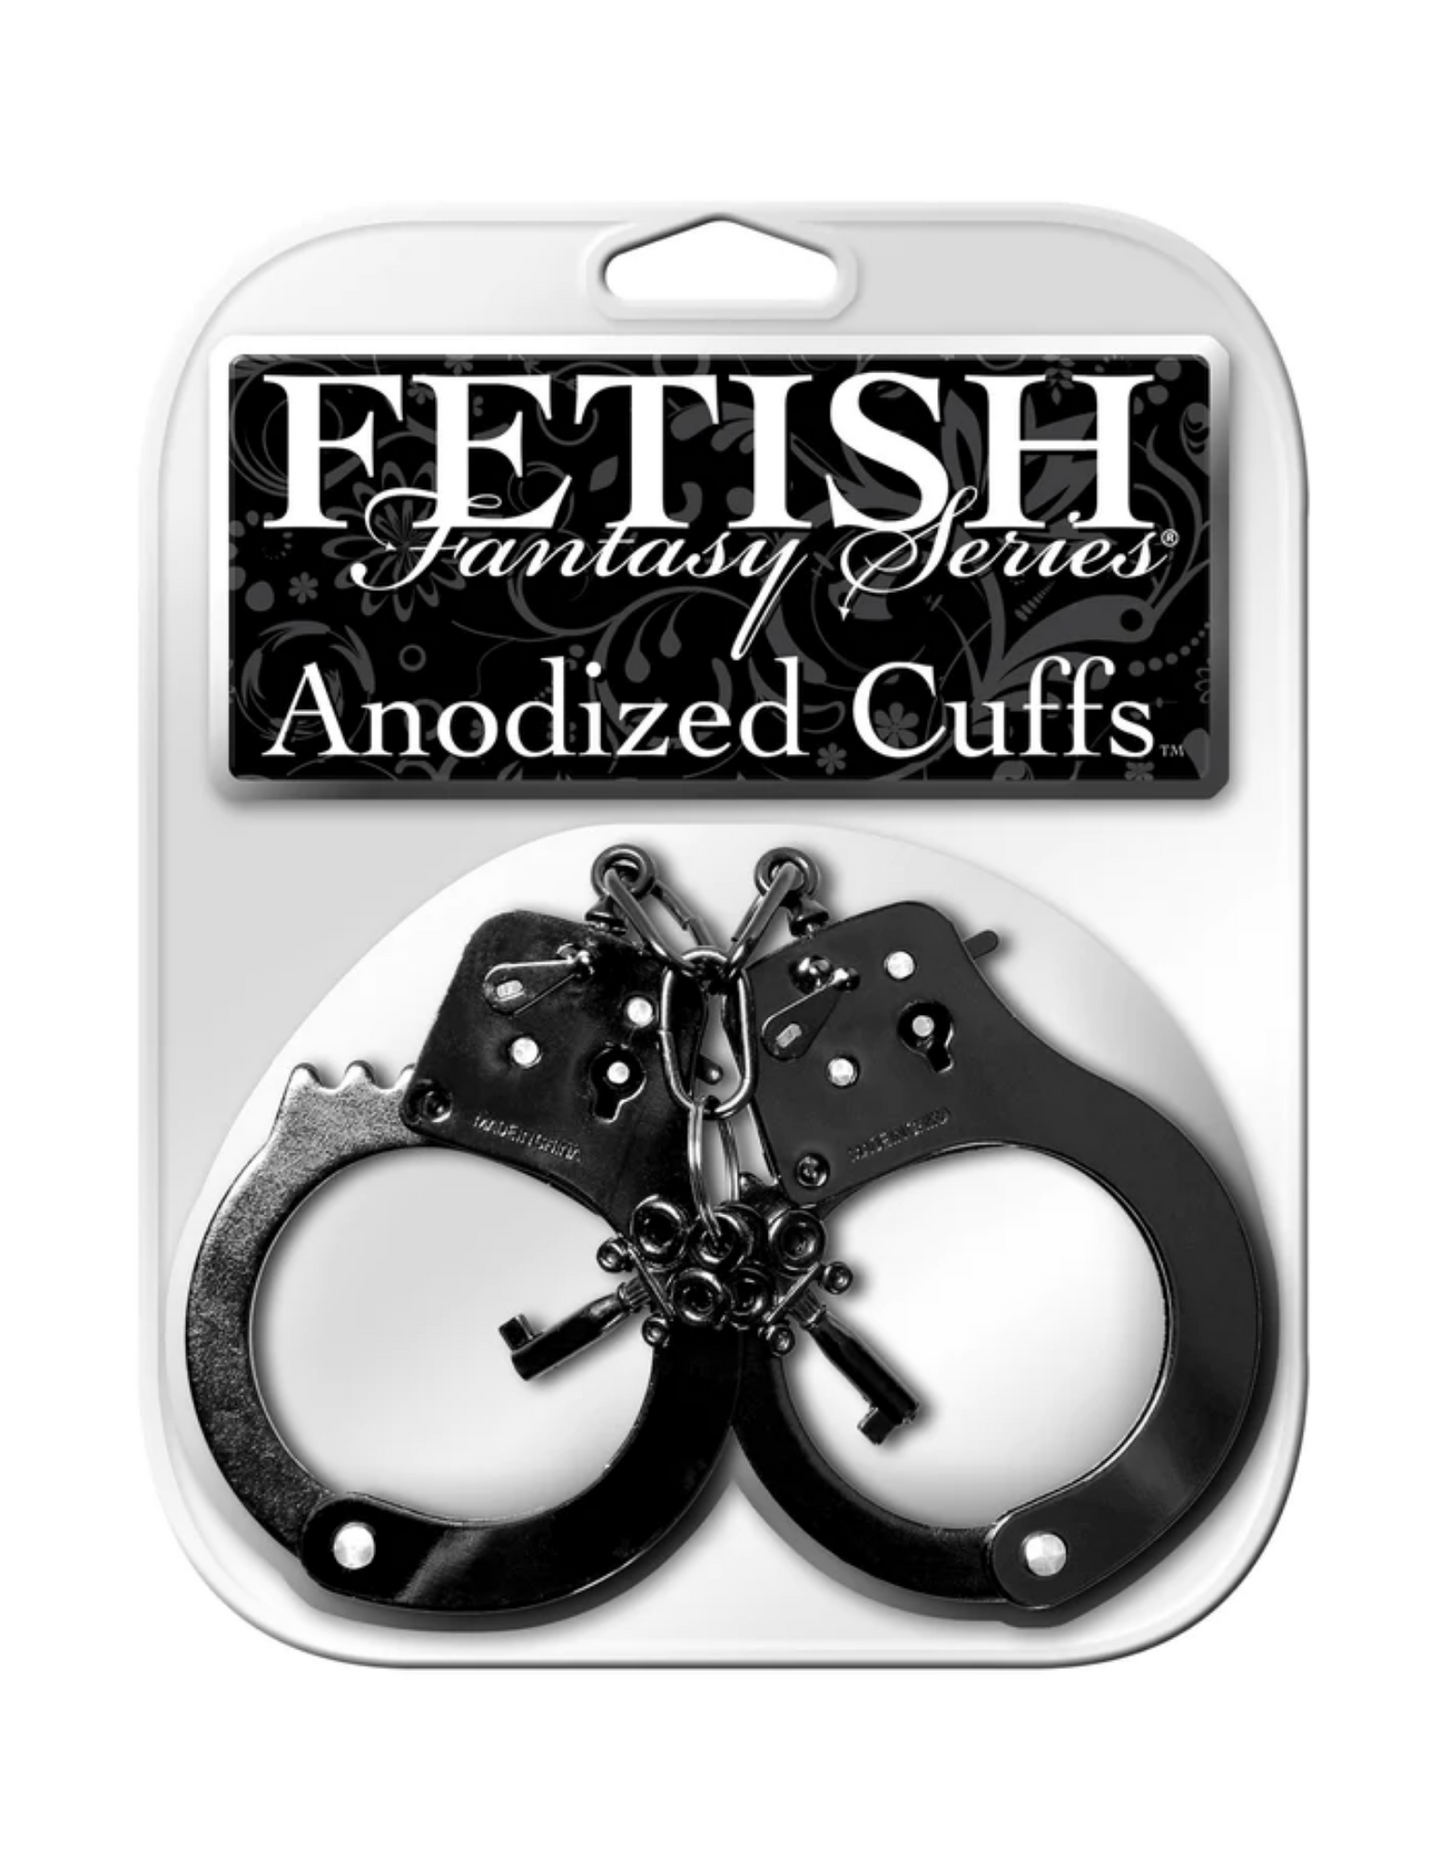 Photo of the Fetish Fantasy Series Anodized Cuffs (metal) from Pipedreams (black) in their package.